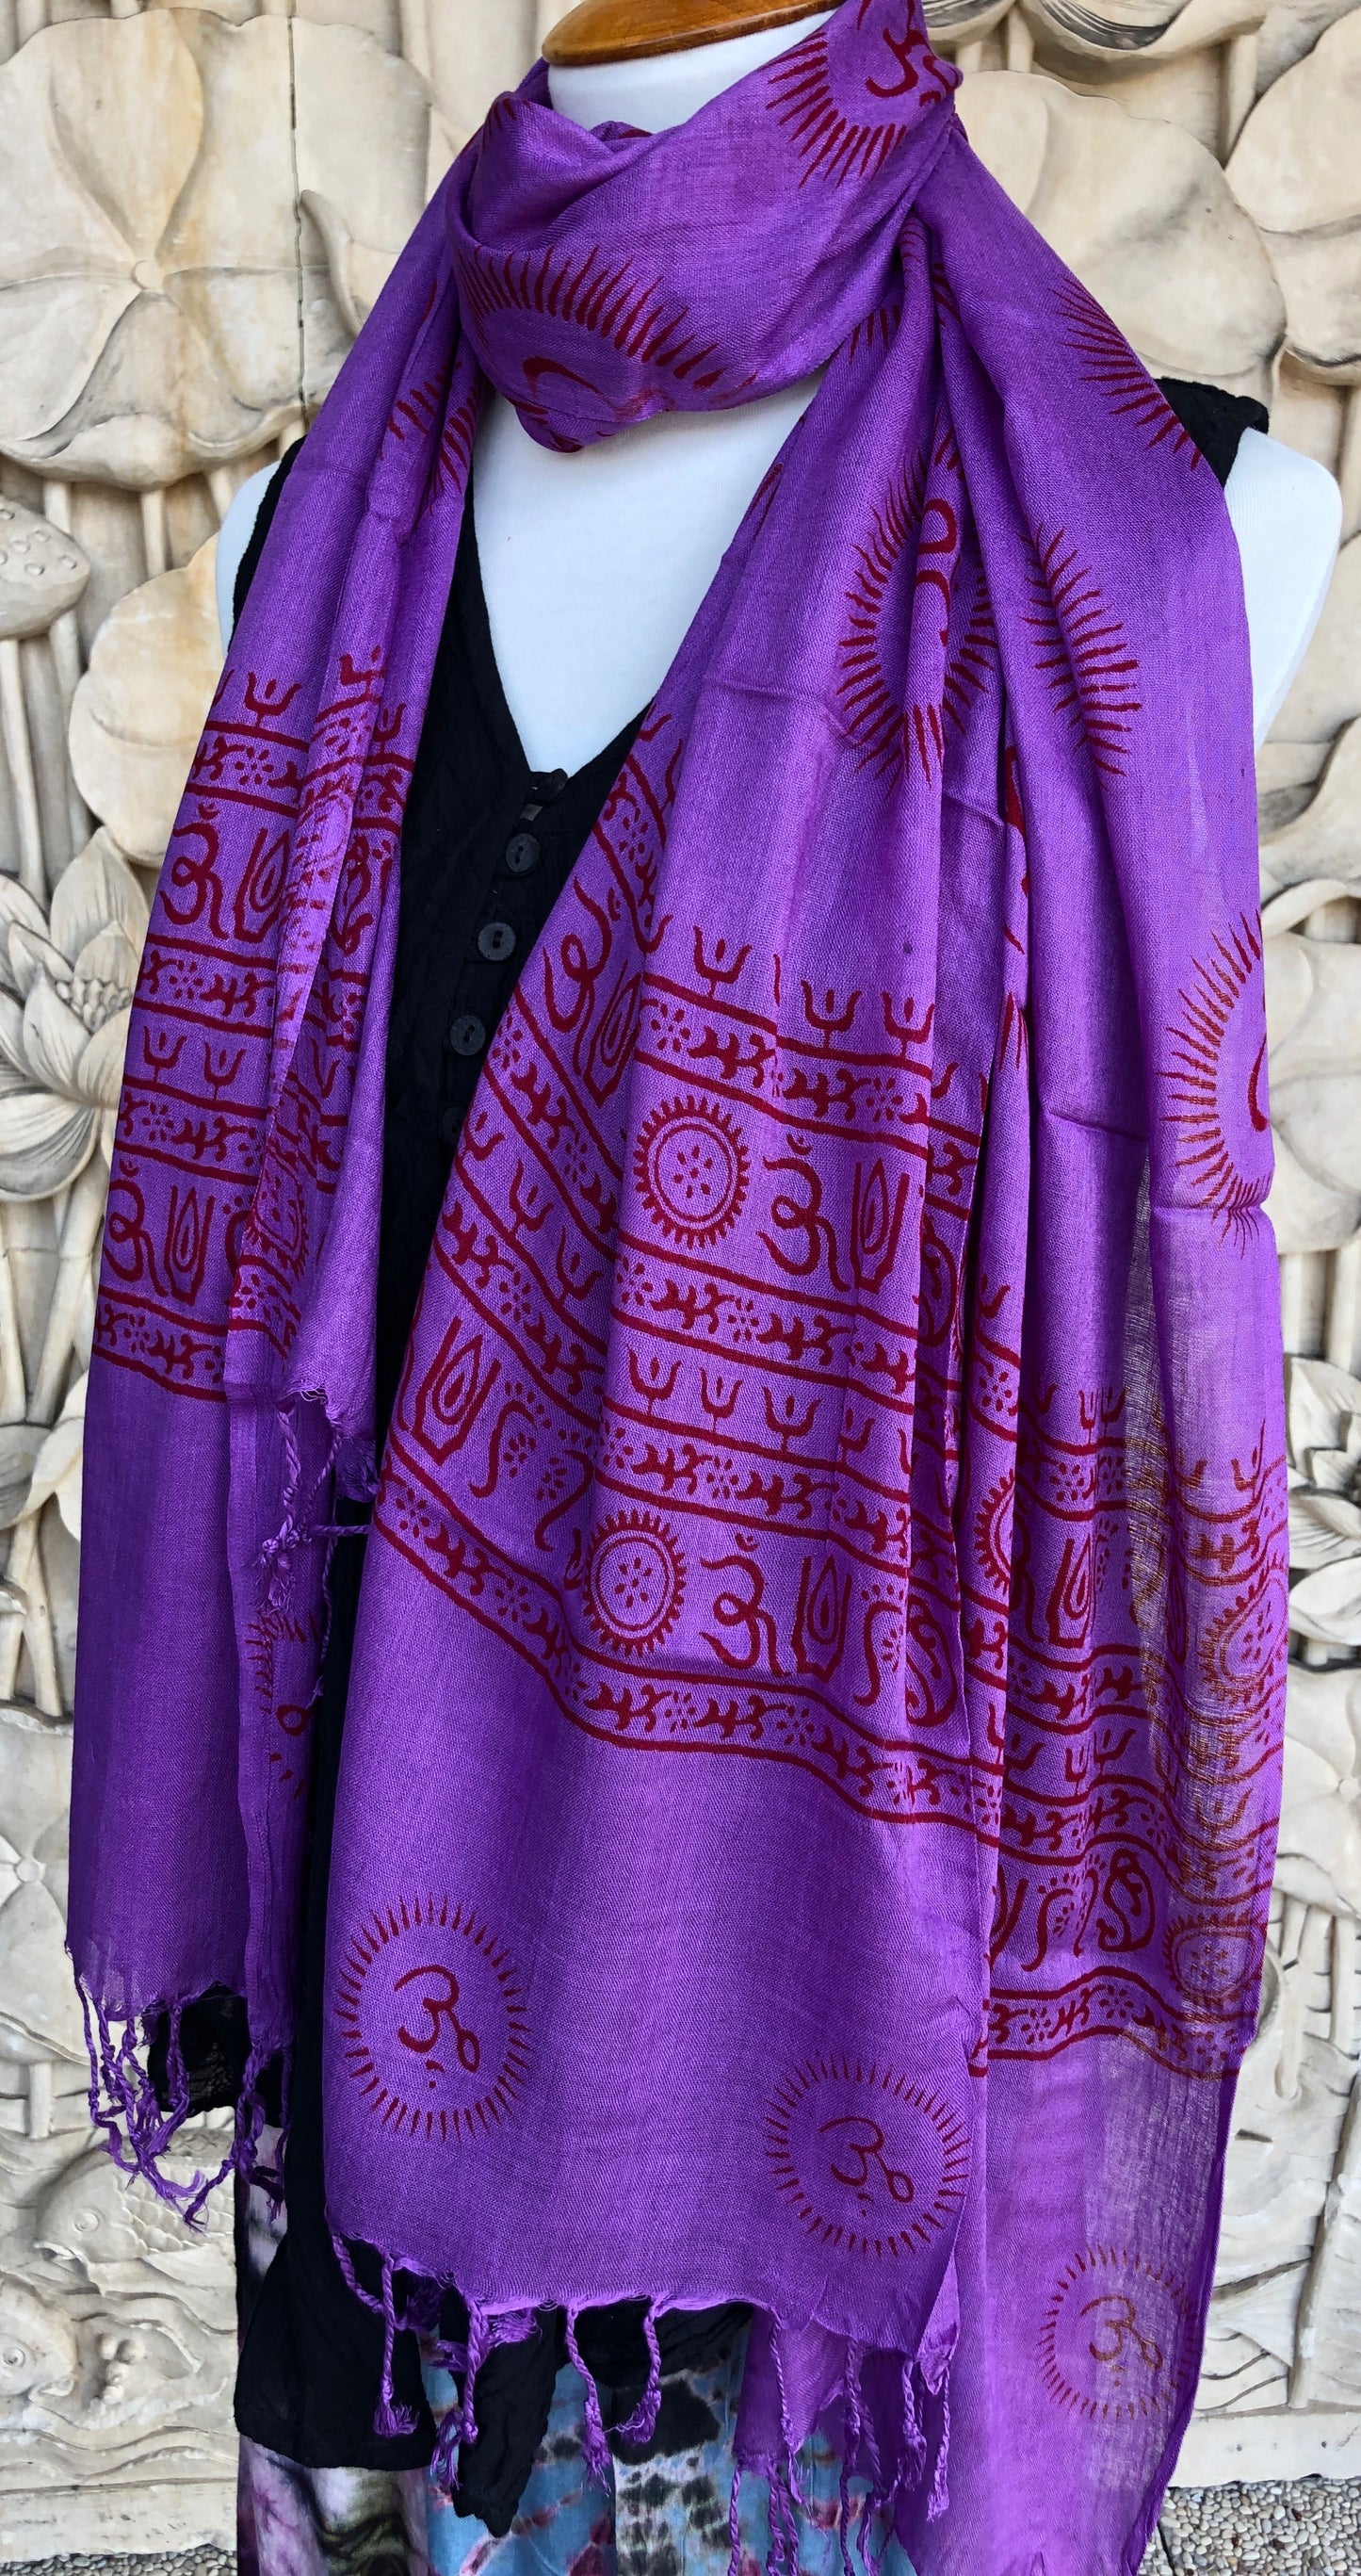 Light Rayon Prayer Scarves w Mantras and fringe 11 Colors